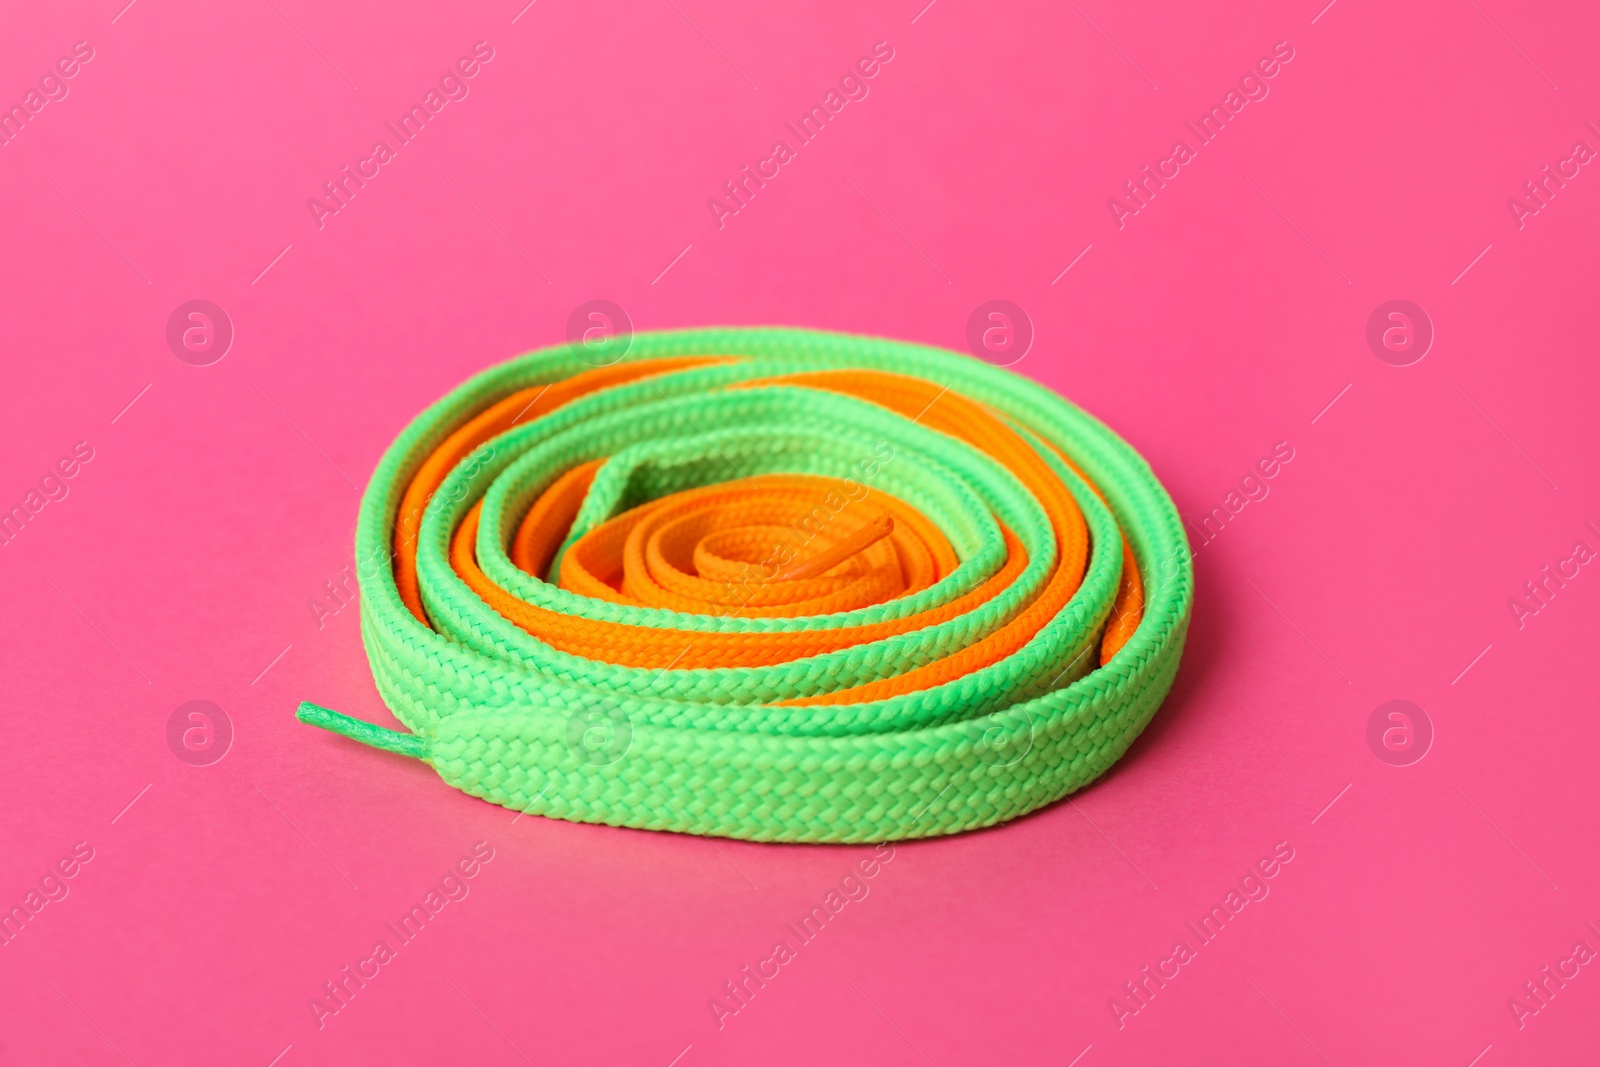 Photo of Mint and orange shoe laces on pink background